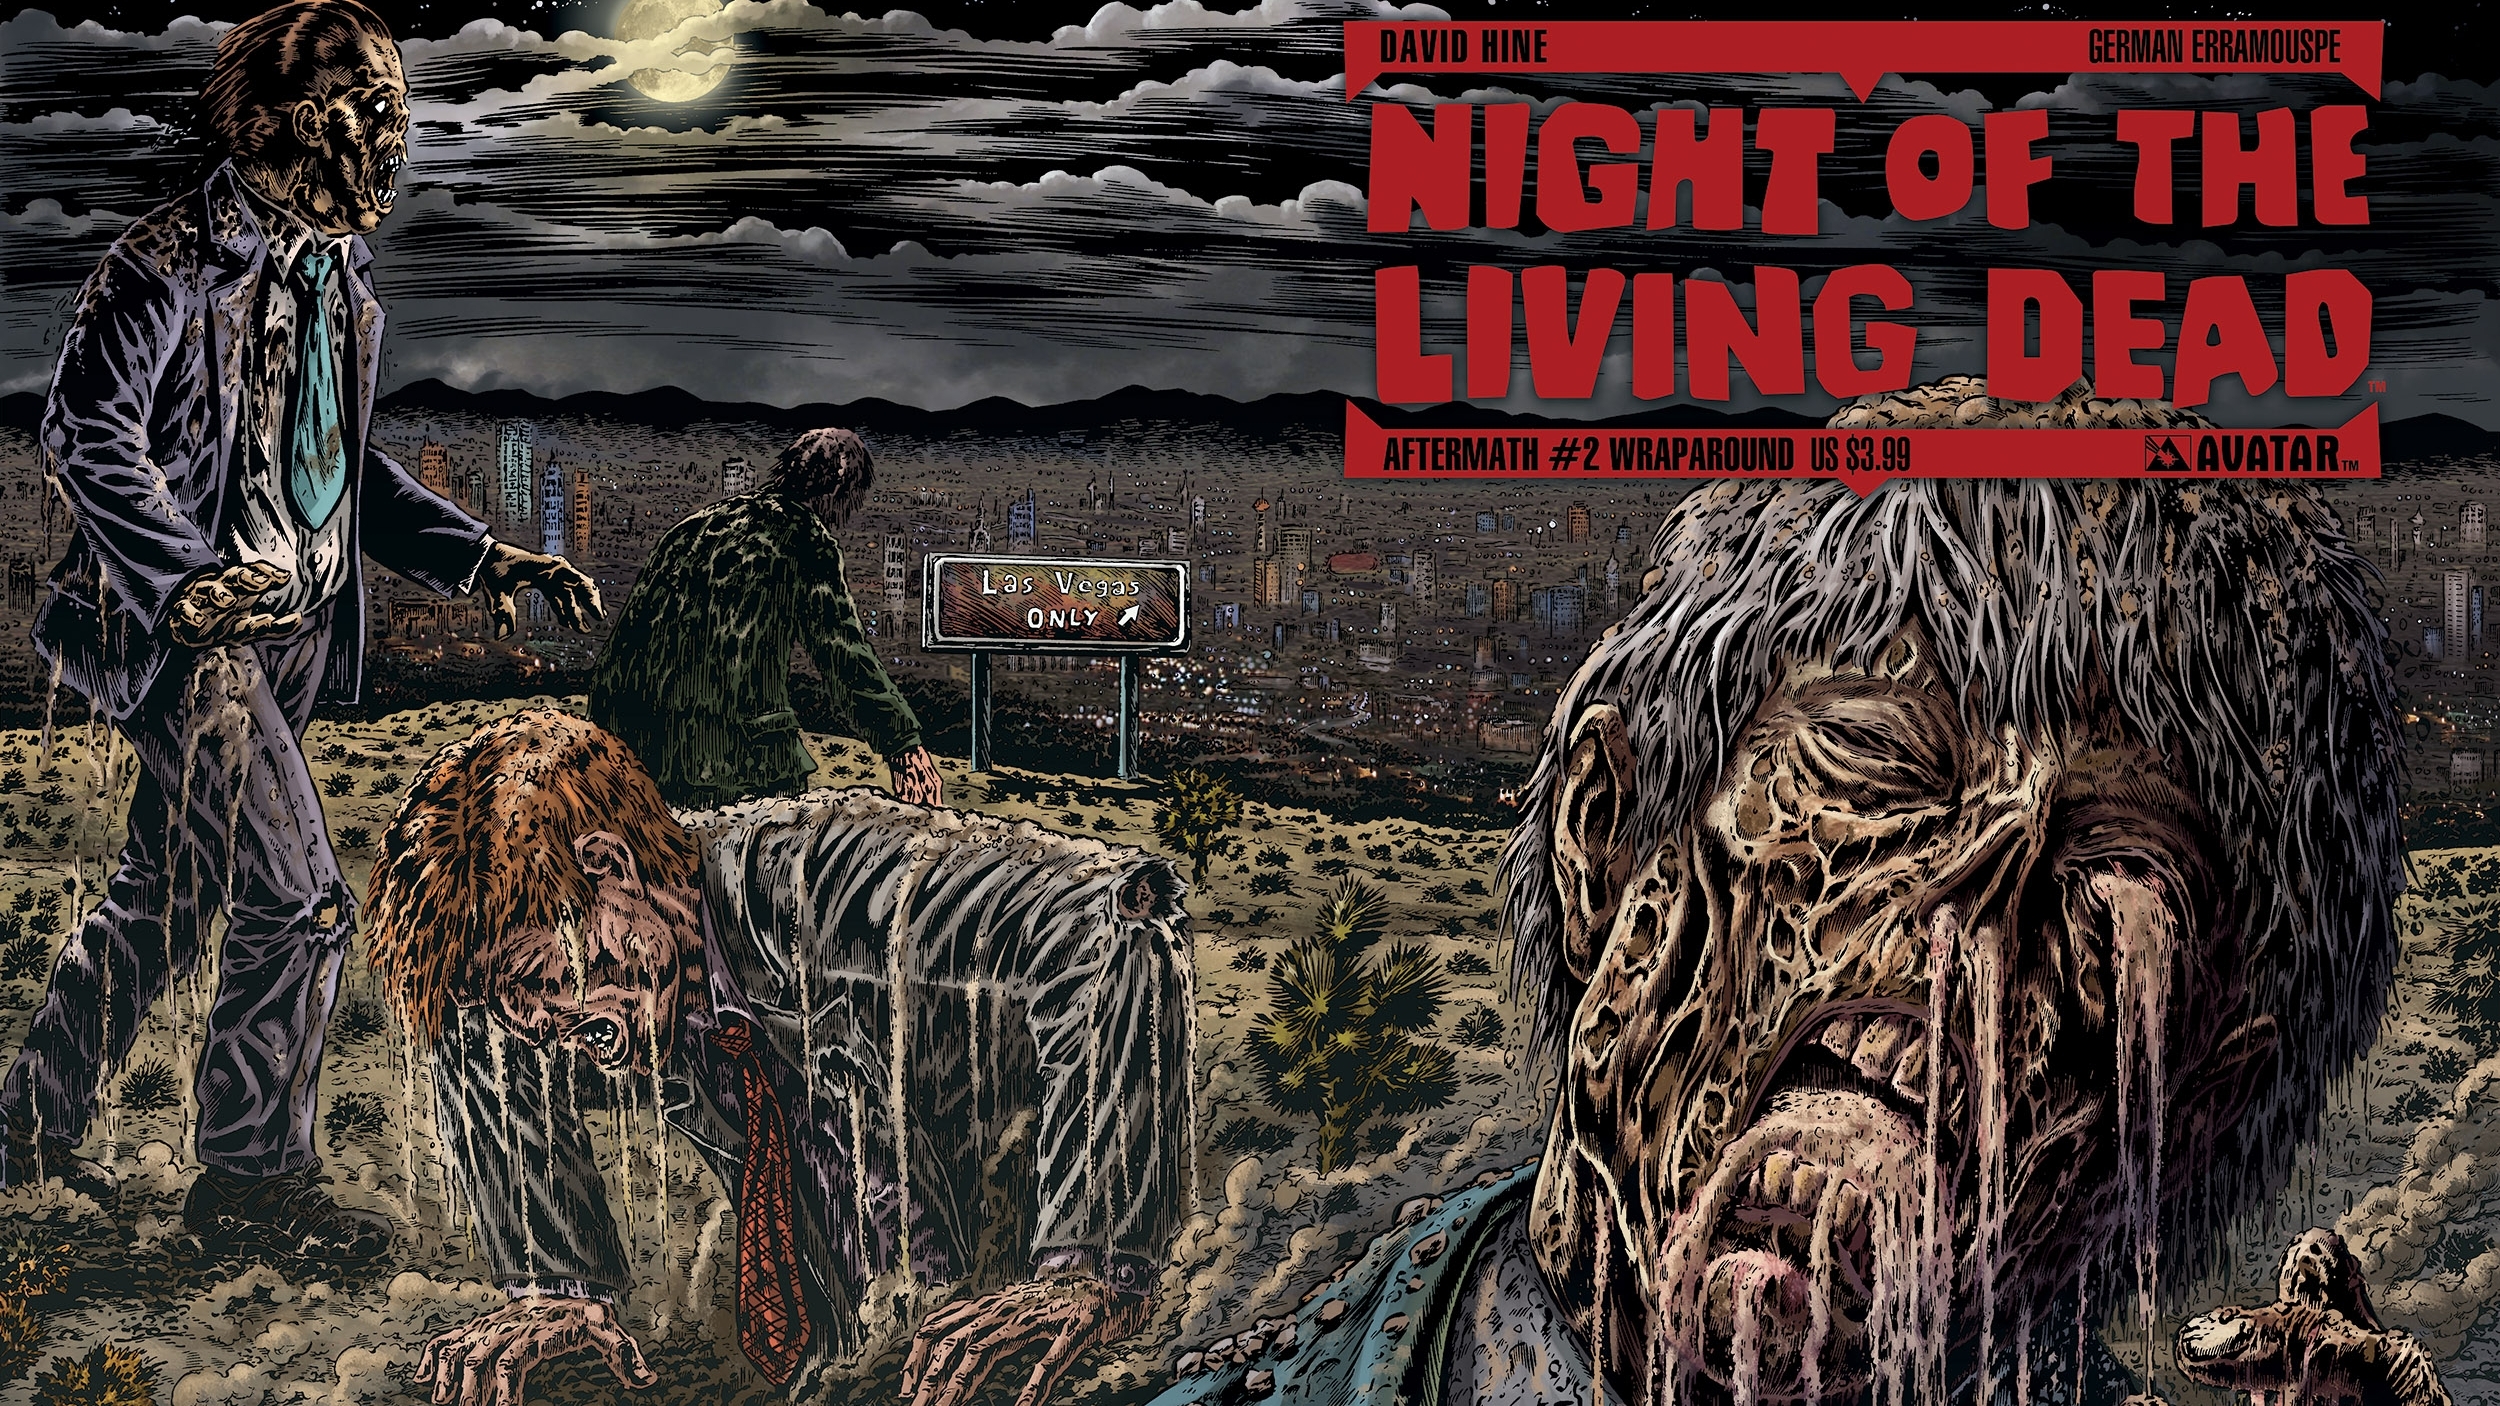 HD wallpaper: Movie, City of the Living Dead